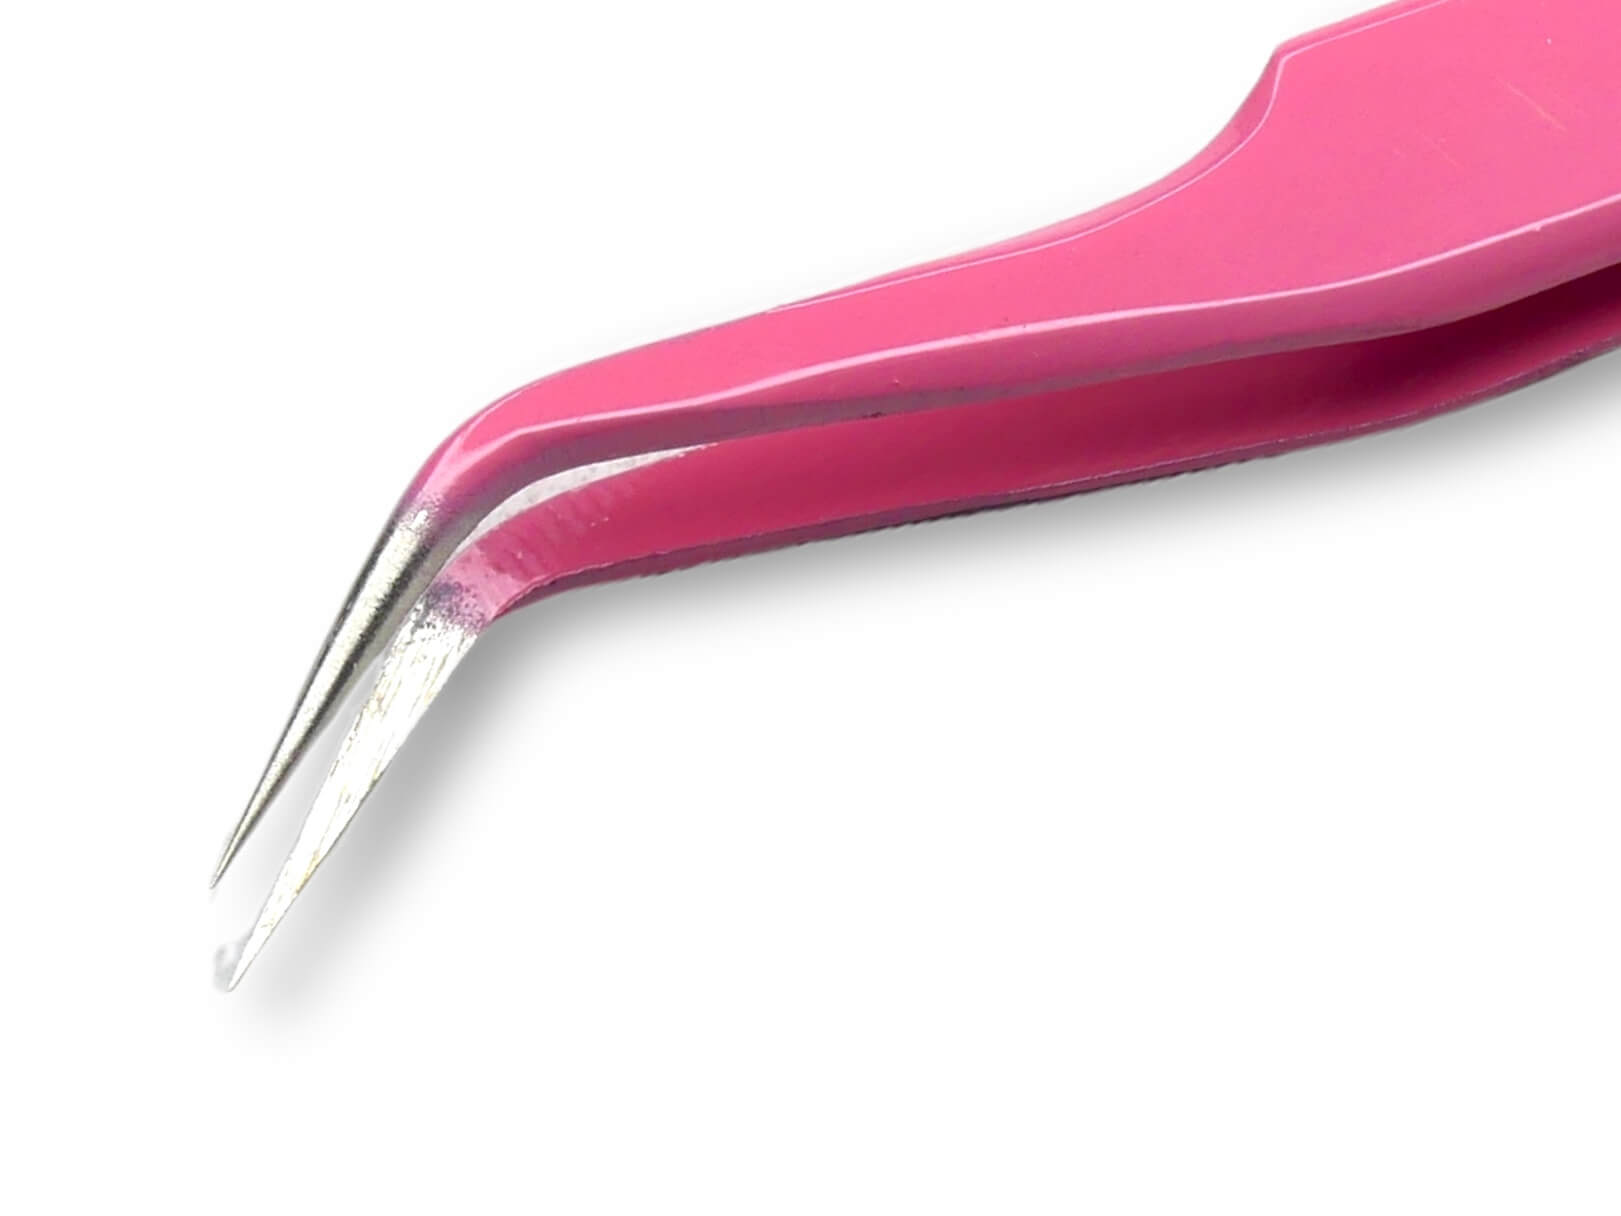 Pointy Curved Nail Art Tweezer ( Pink ) - My Little Nail Art Shop